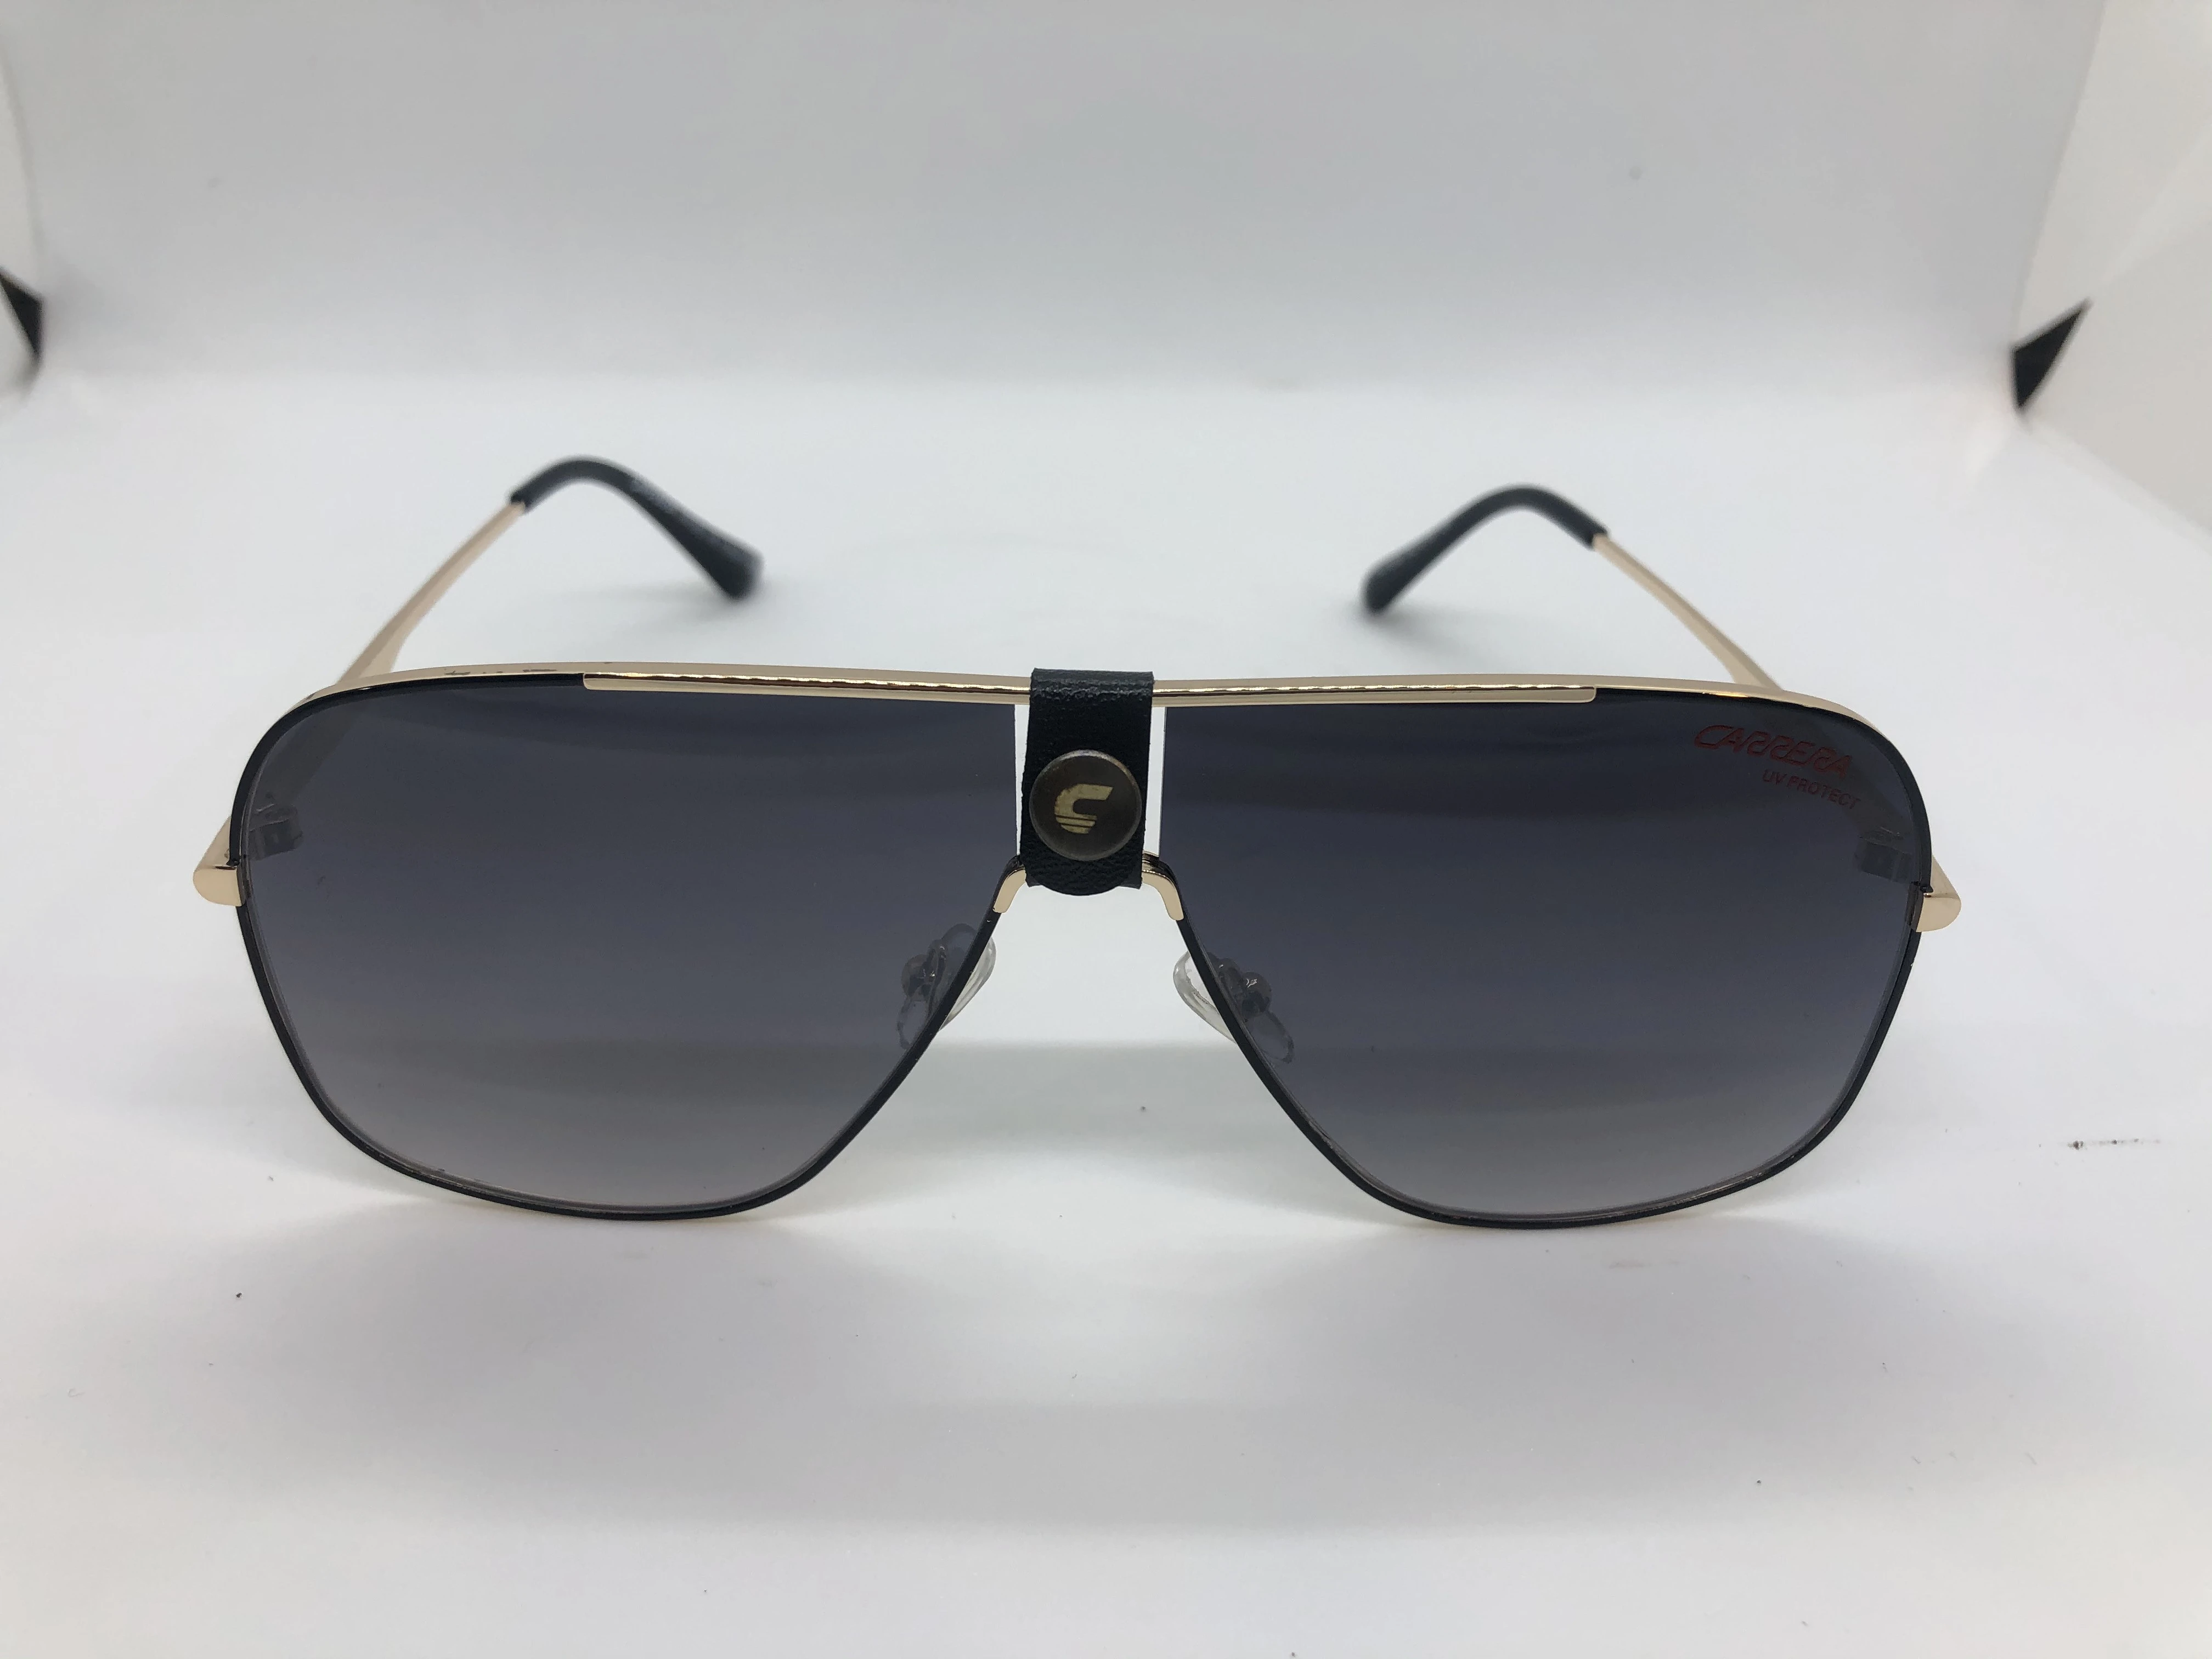 Sunglasses - from Carrera - with a golden metal frame - and black lenses - and golden metal arms - for men